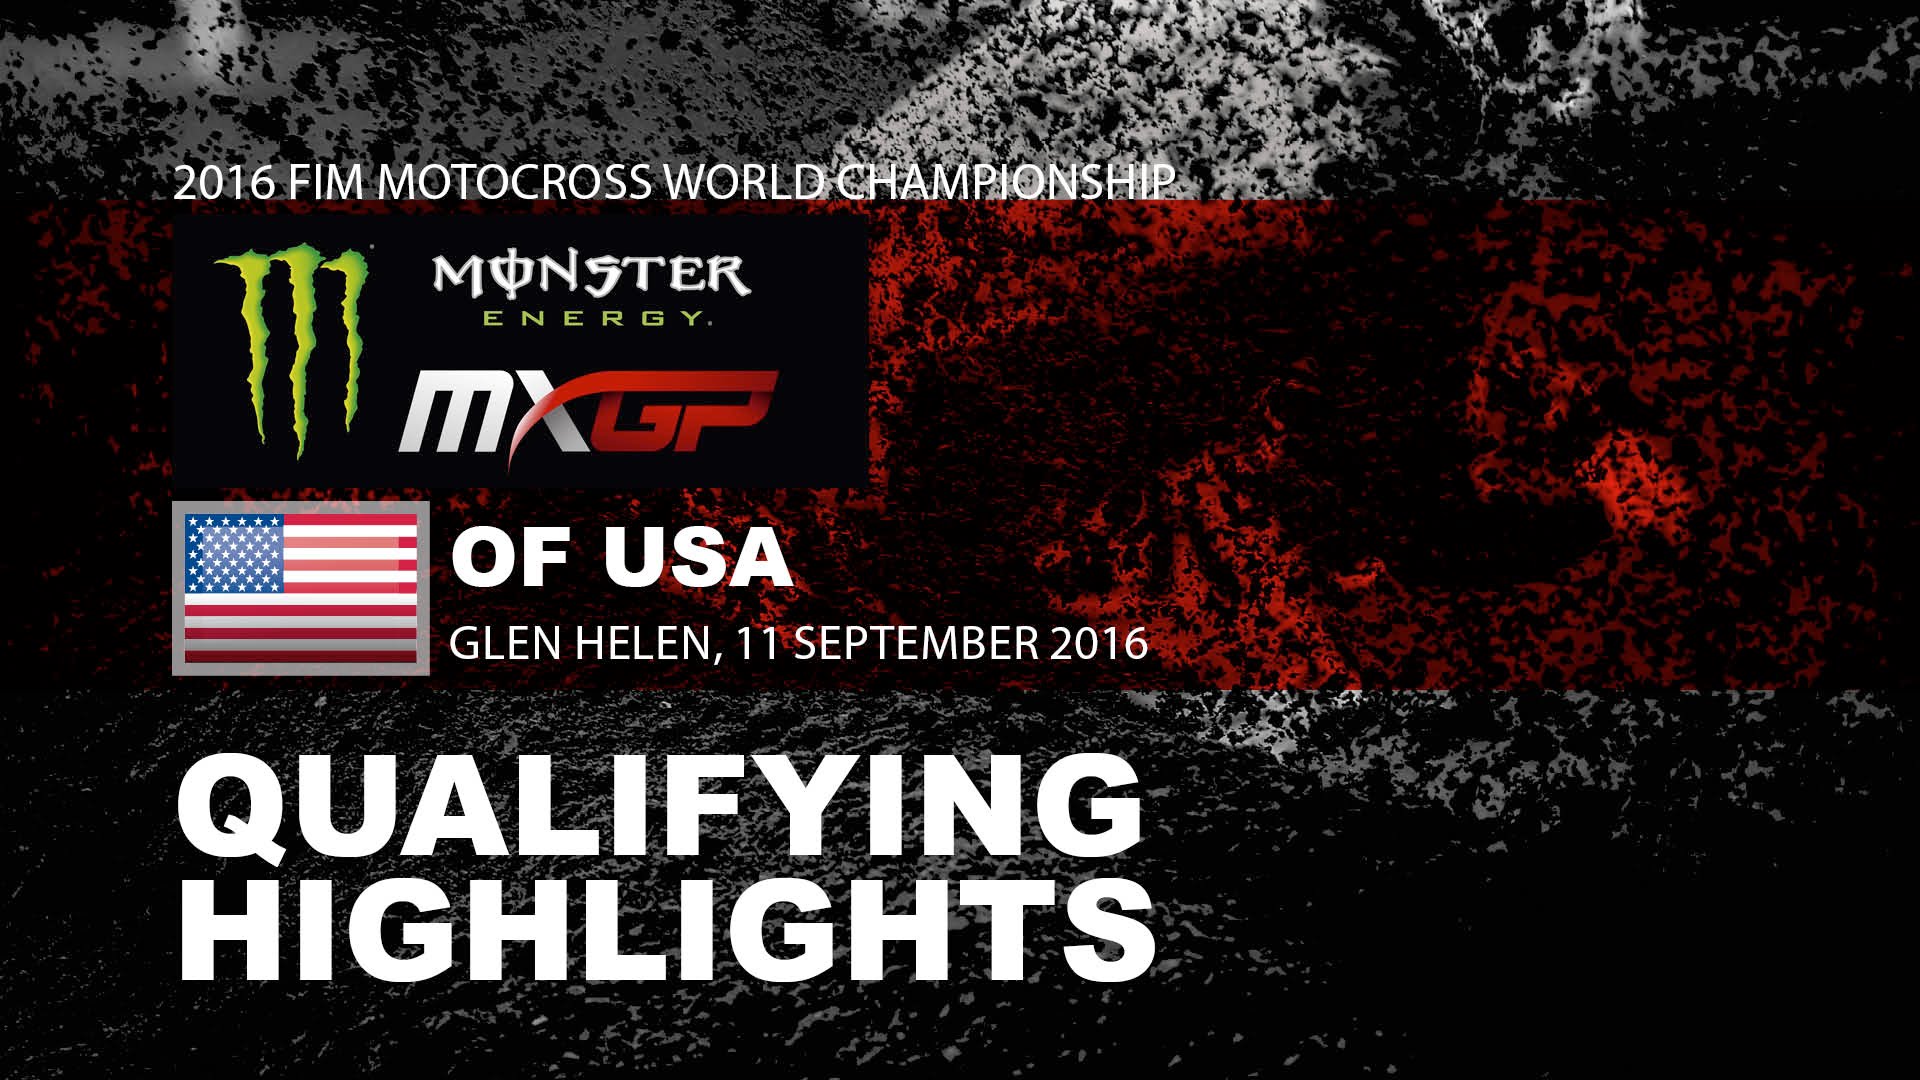 VIDEOS: MXGP Qualifying Race Highlights Monster Energy of The USA 2016